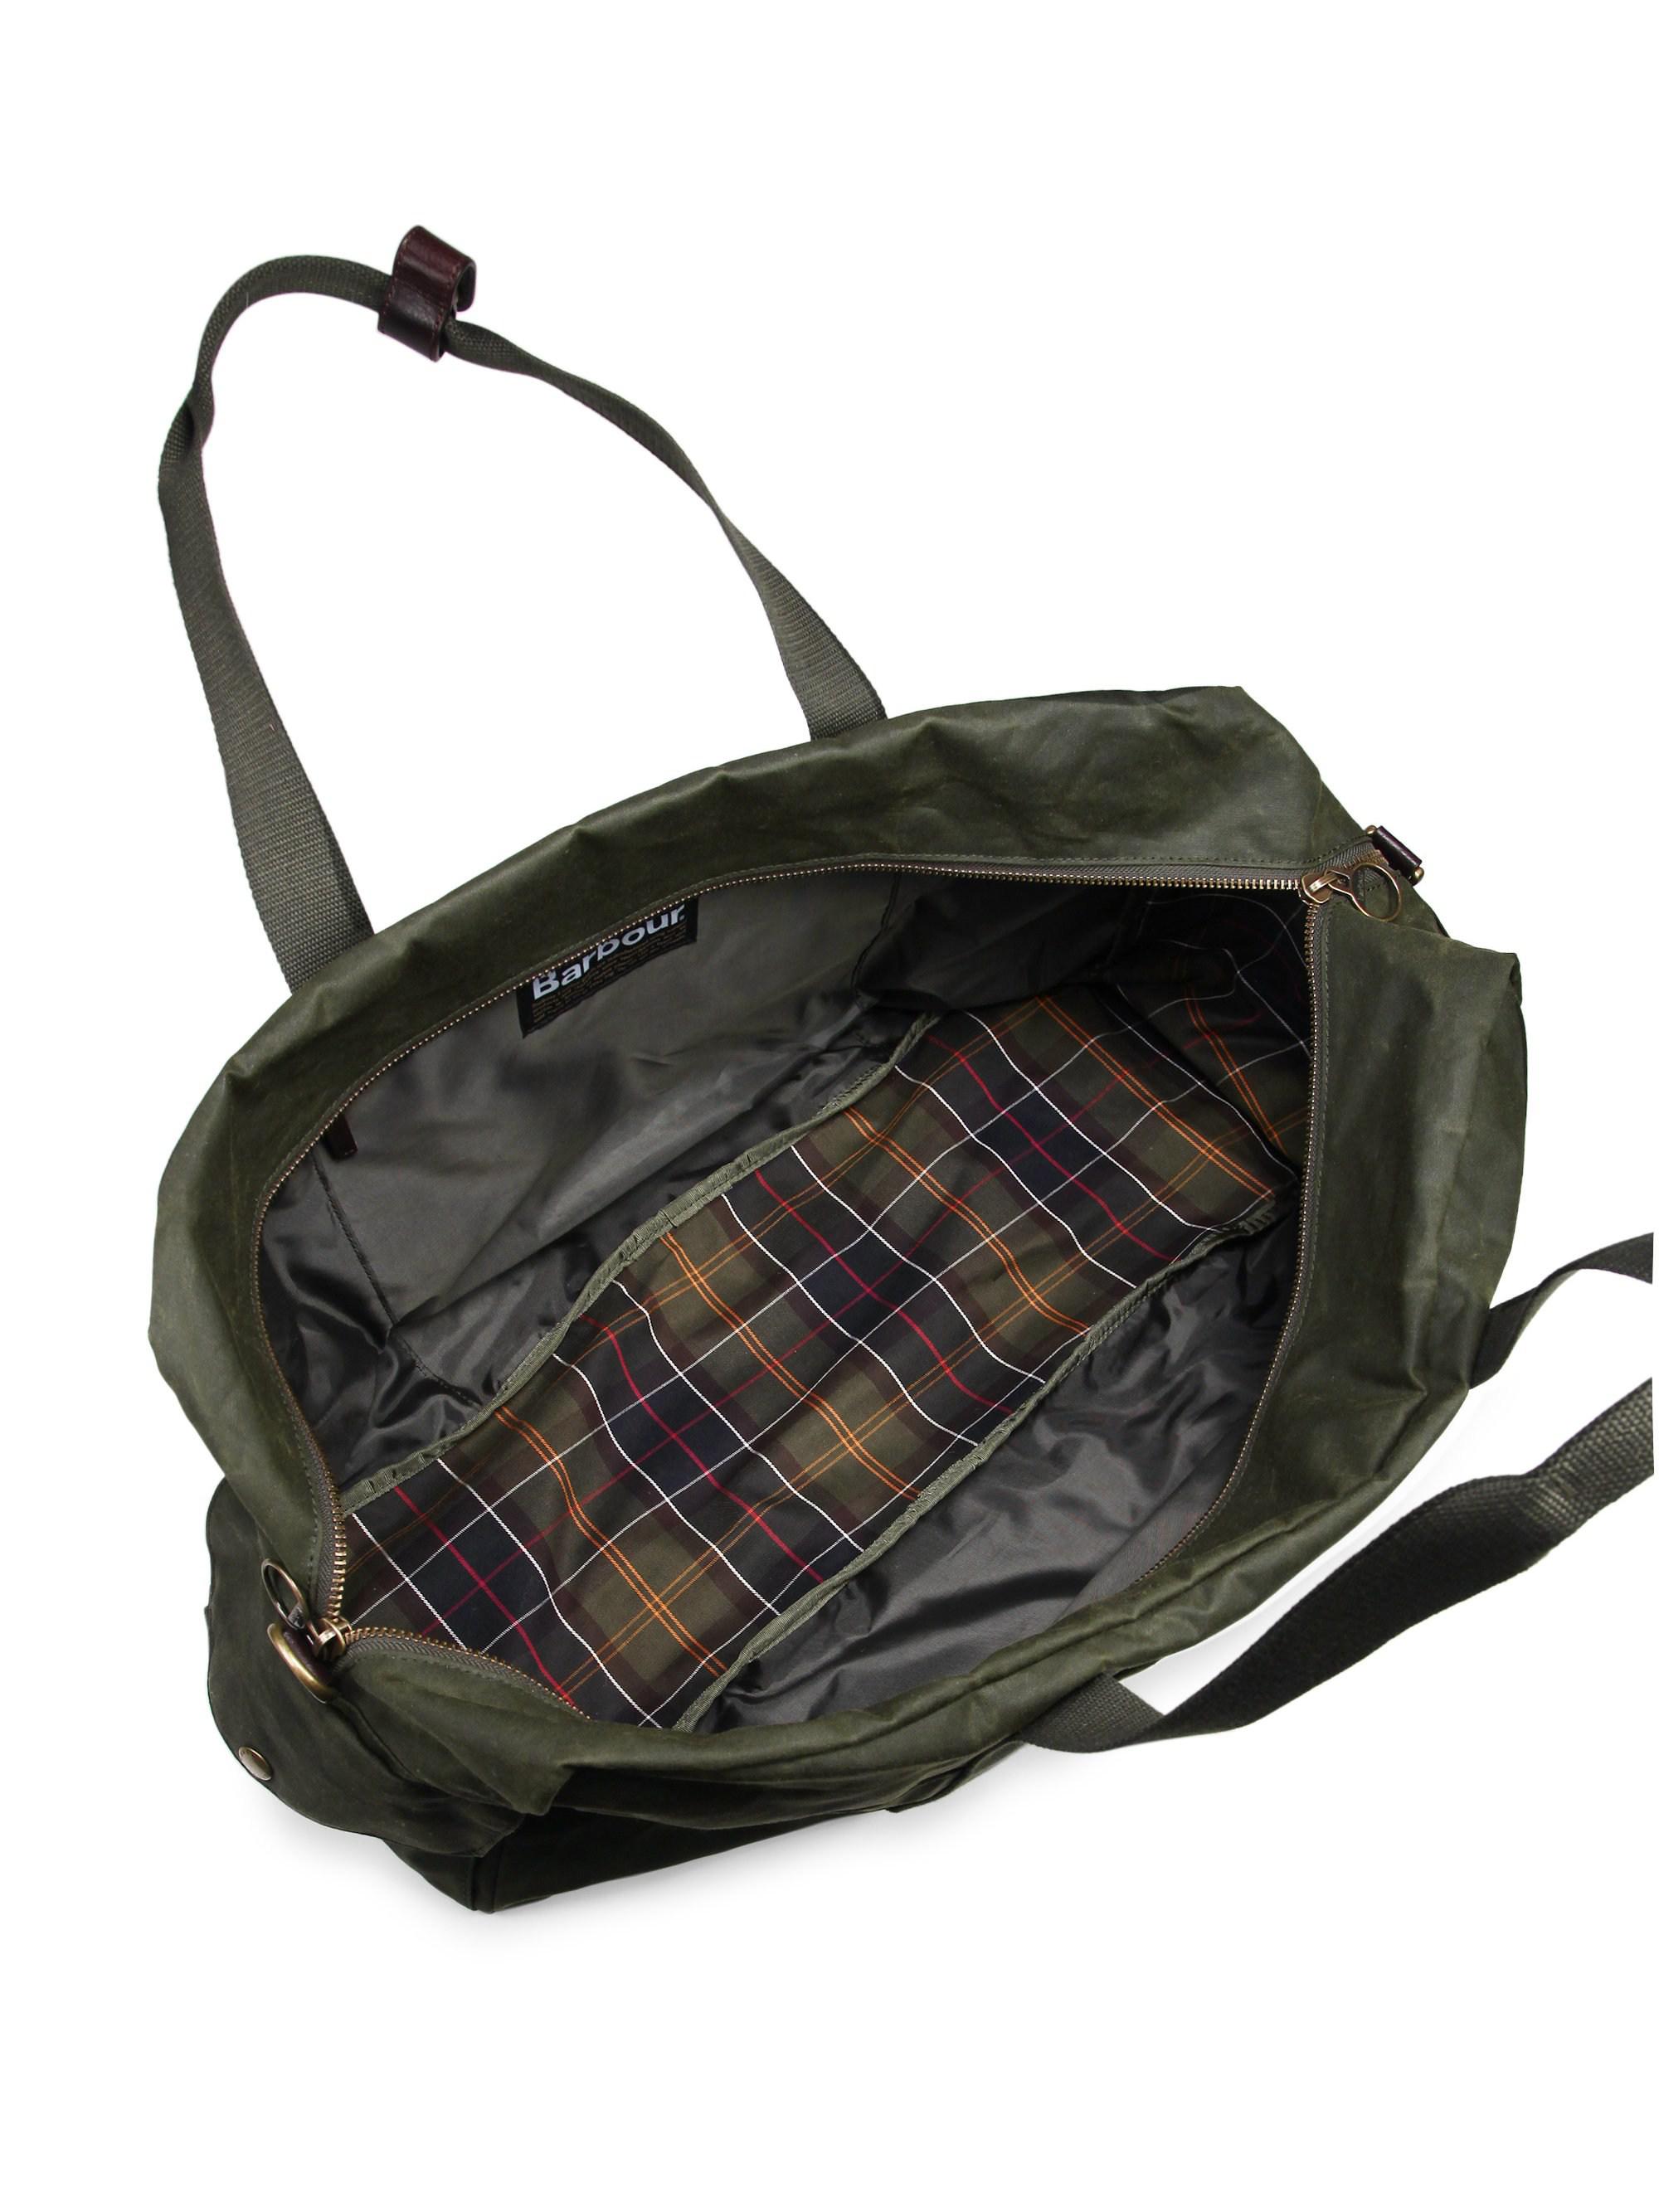 Barbour Oakwell Holdall, Buy Now, Flash Sales, 50% OFF,  www.acananortheast.com